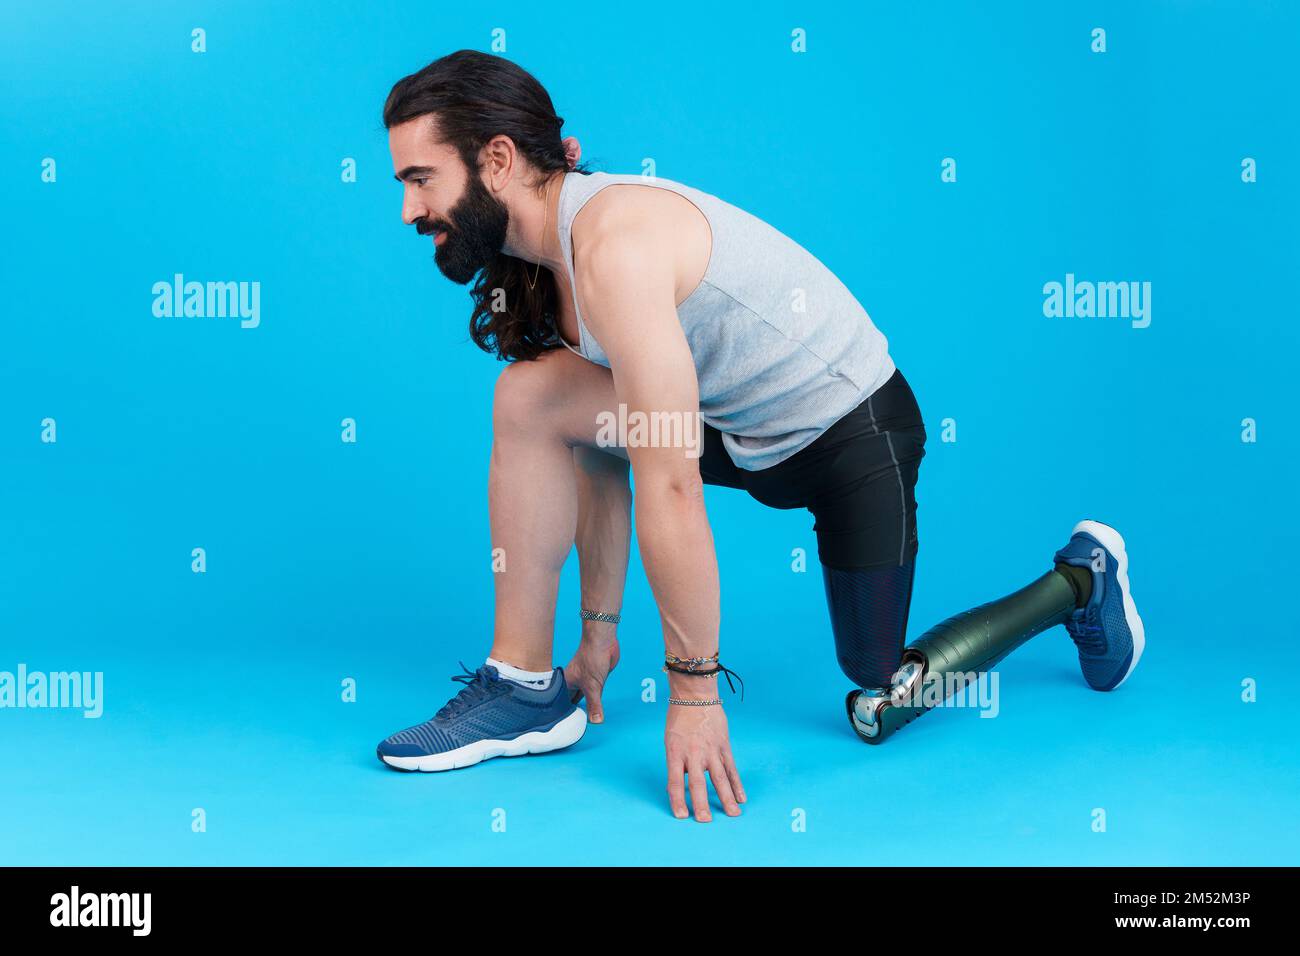 Man with amputated leg and prosthesis in sprinting position Stock Photo